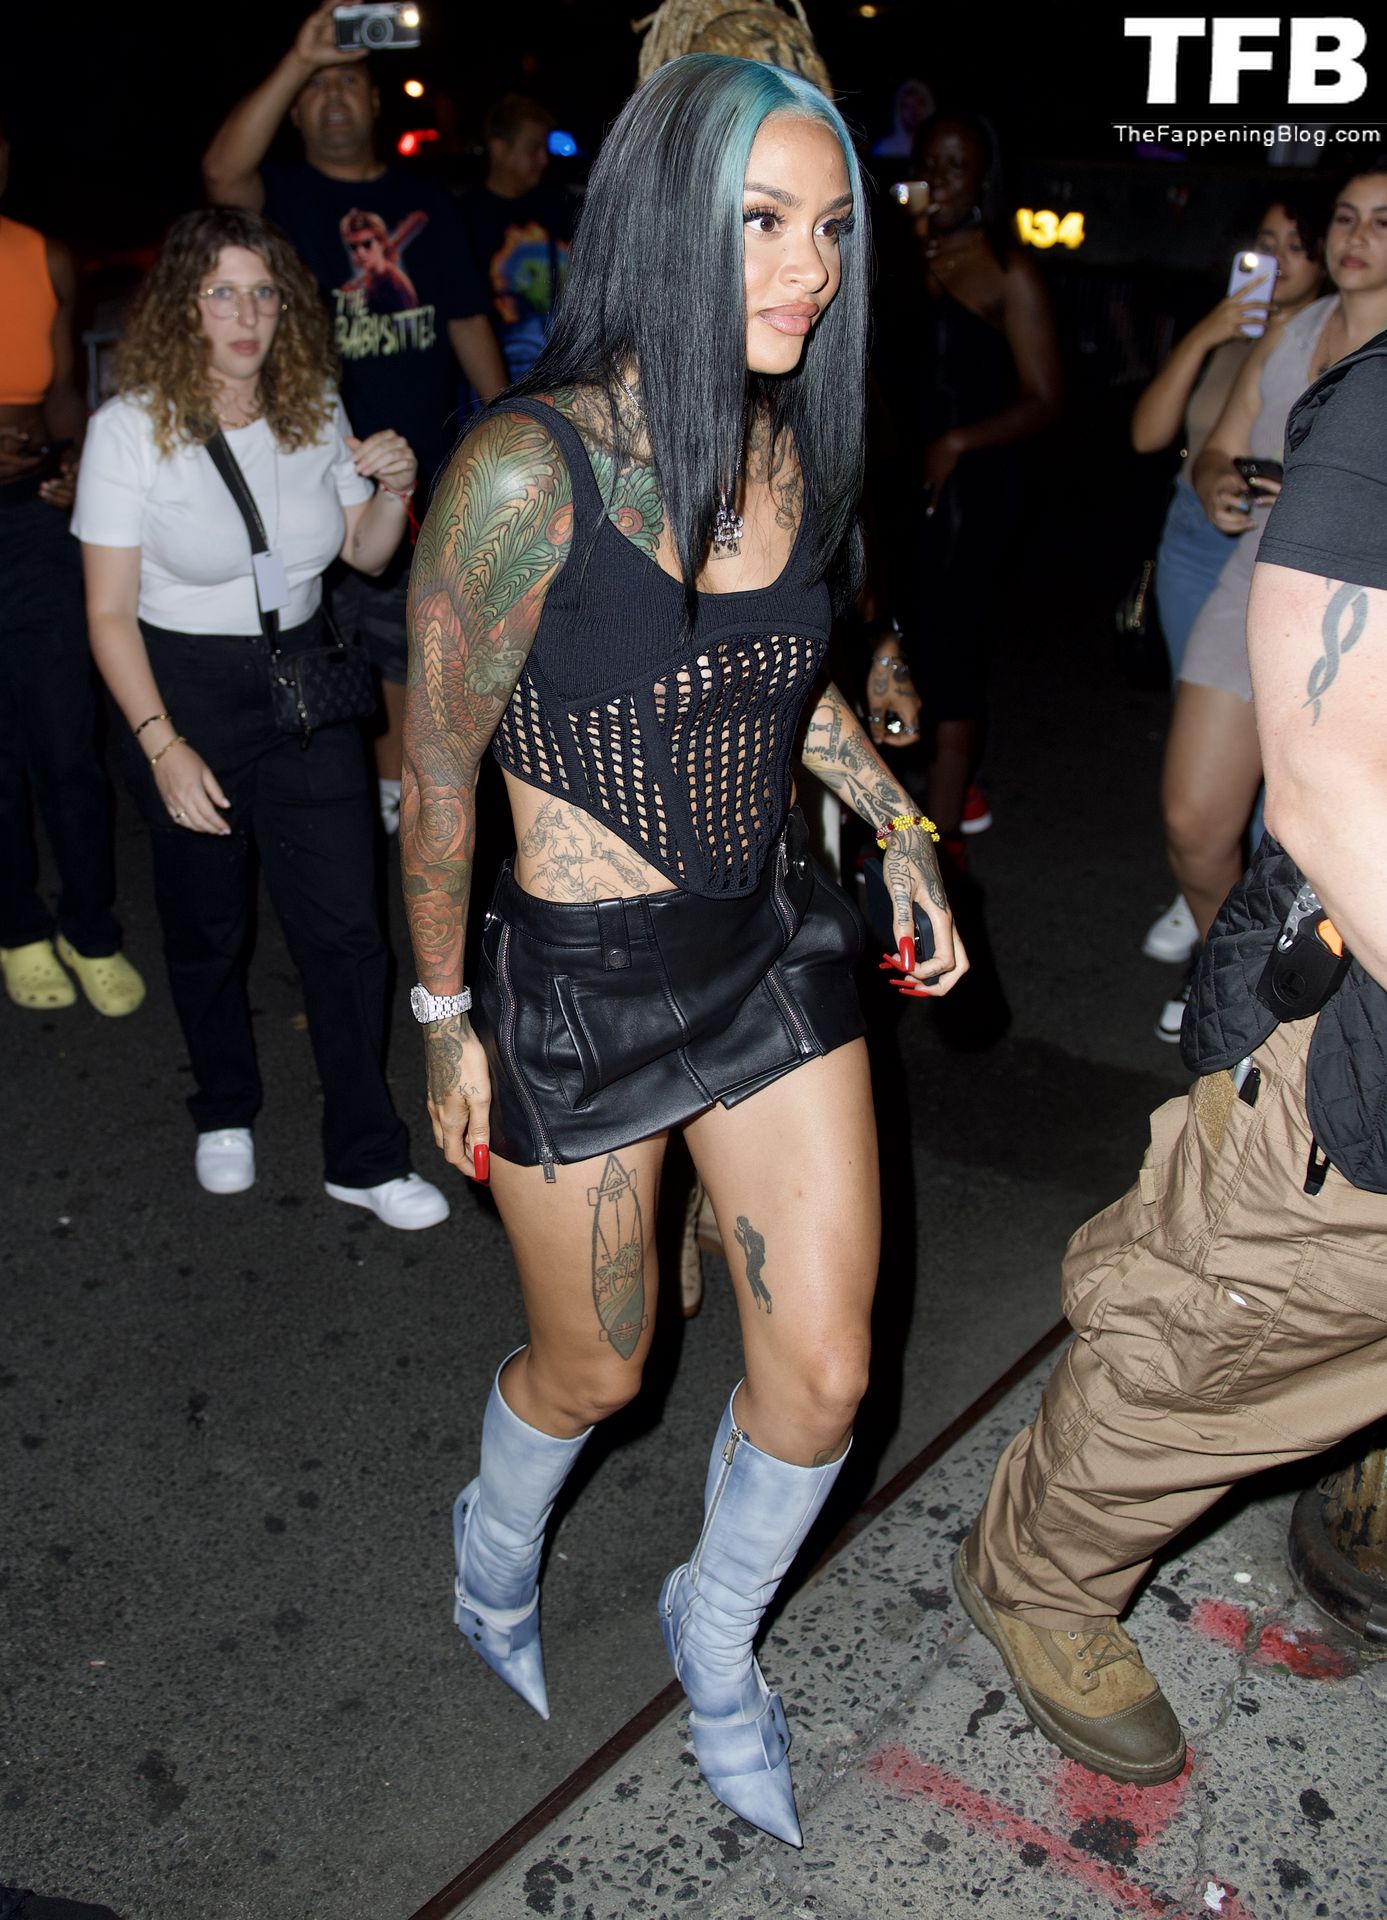 Kehlani See Through Nudity The Fappening Blog 1 - Kehlani Flashes Her Nude Tits in NYC (17 Photos)